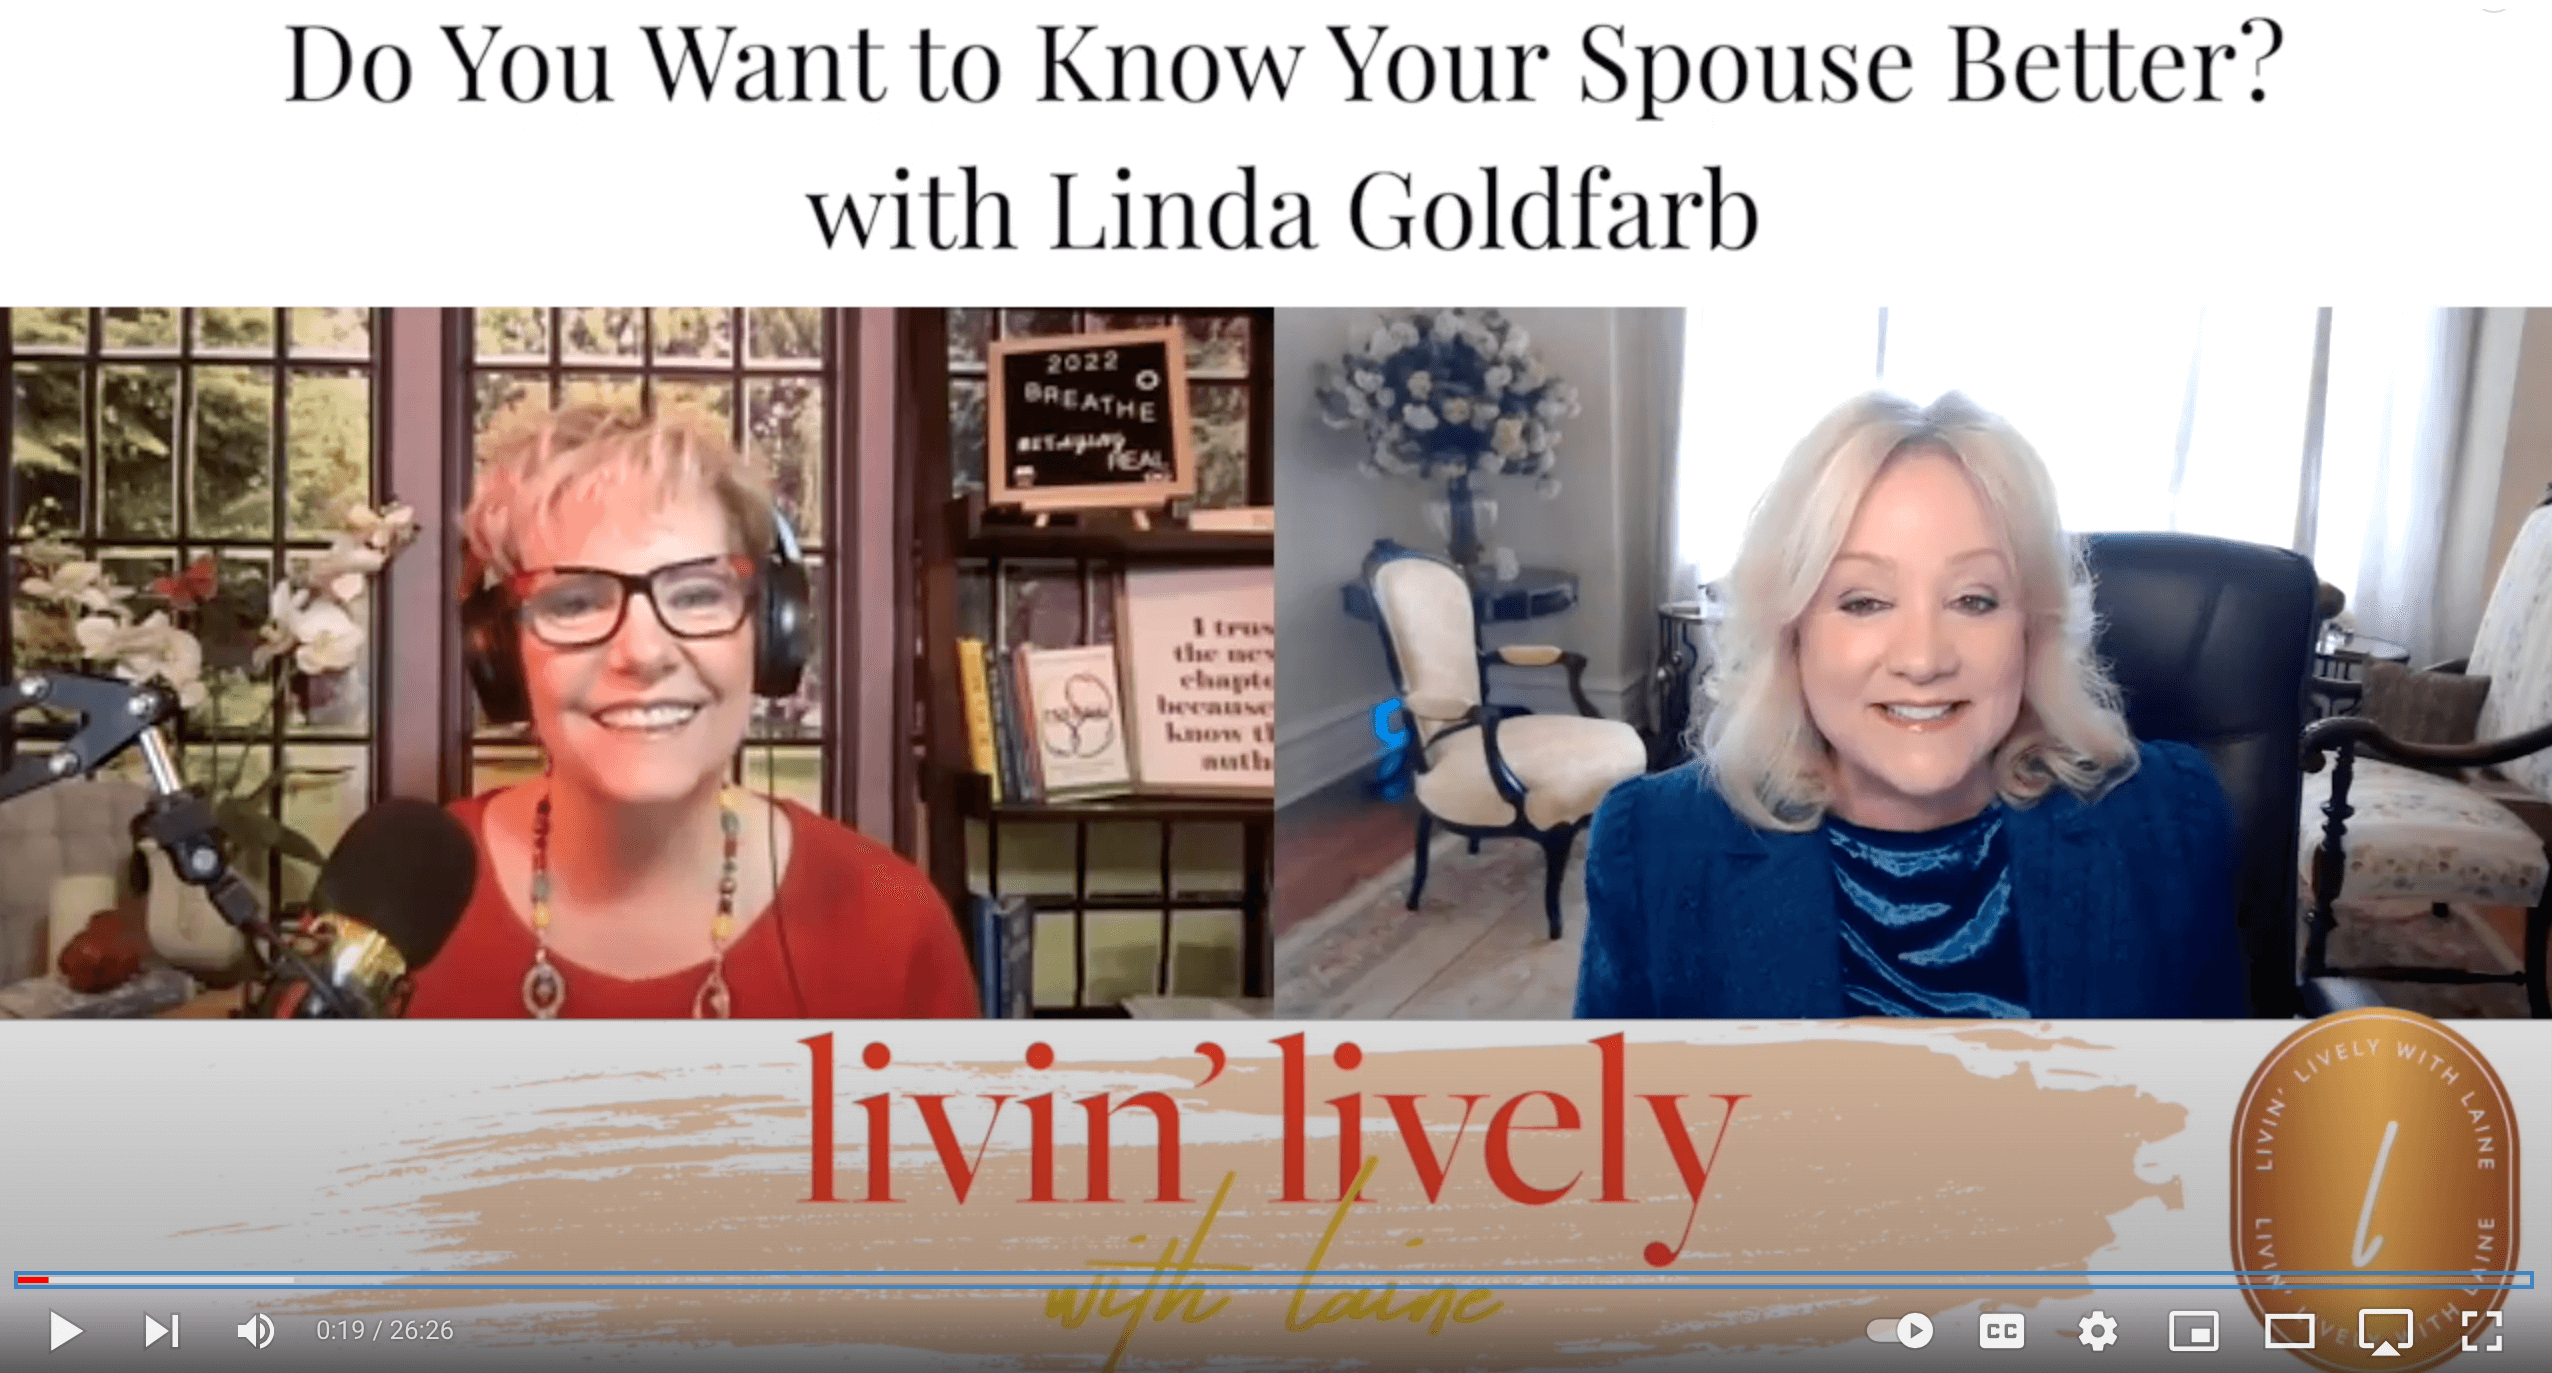 Do You Want to Know Your Spouse Better? with Linda Goldfarb